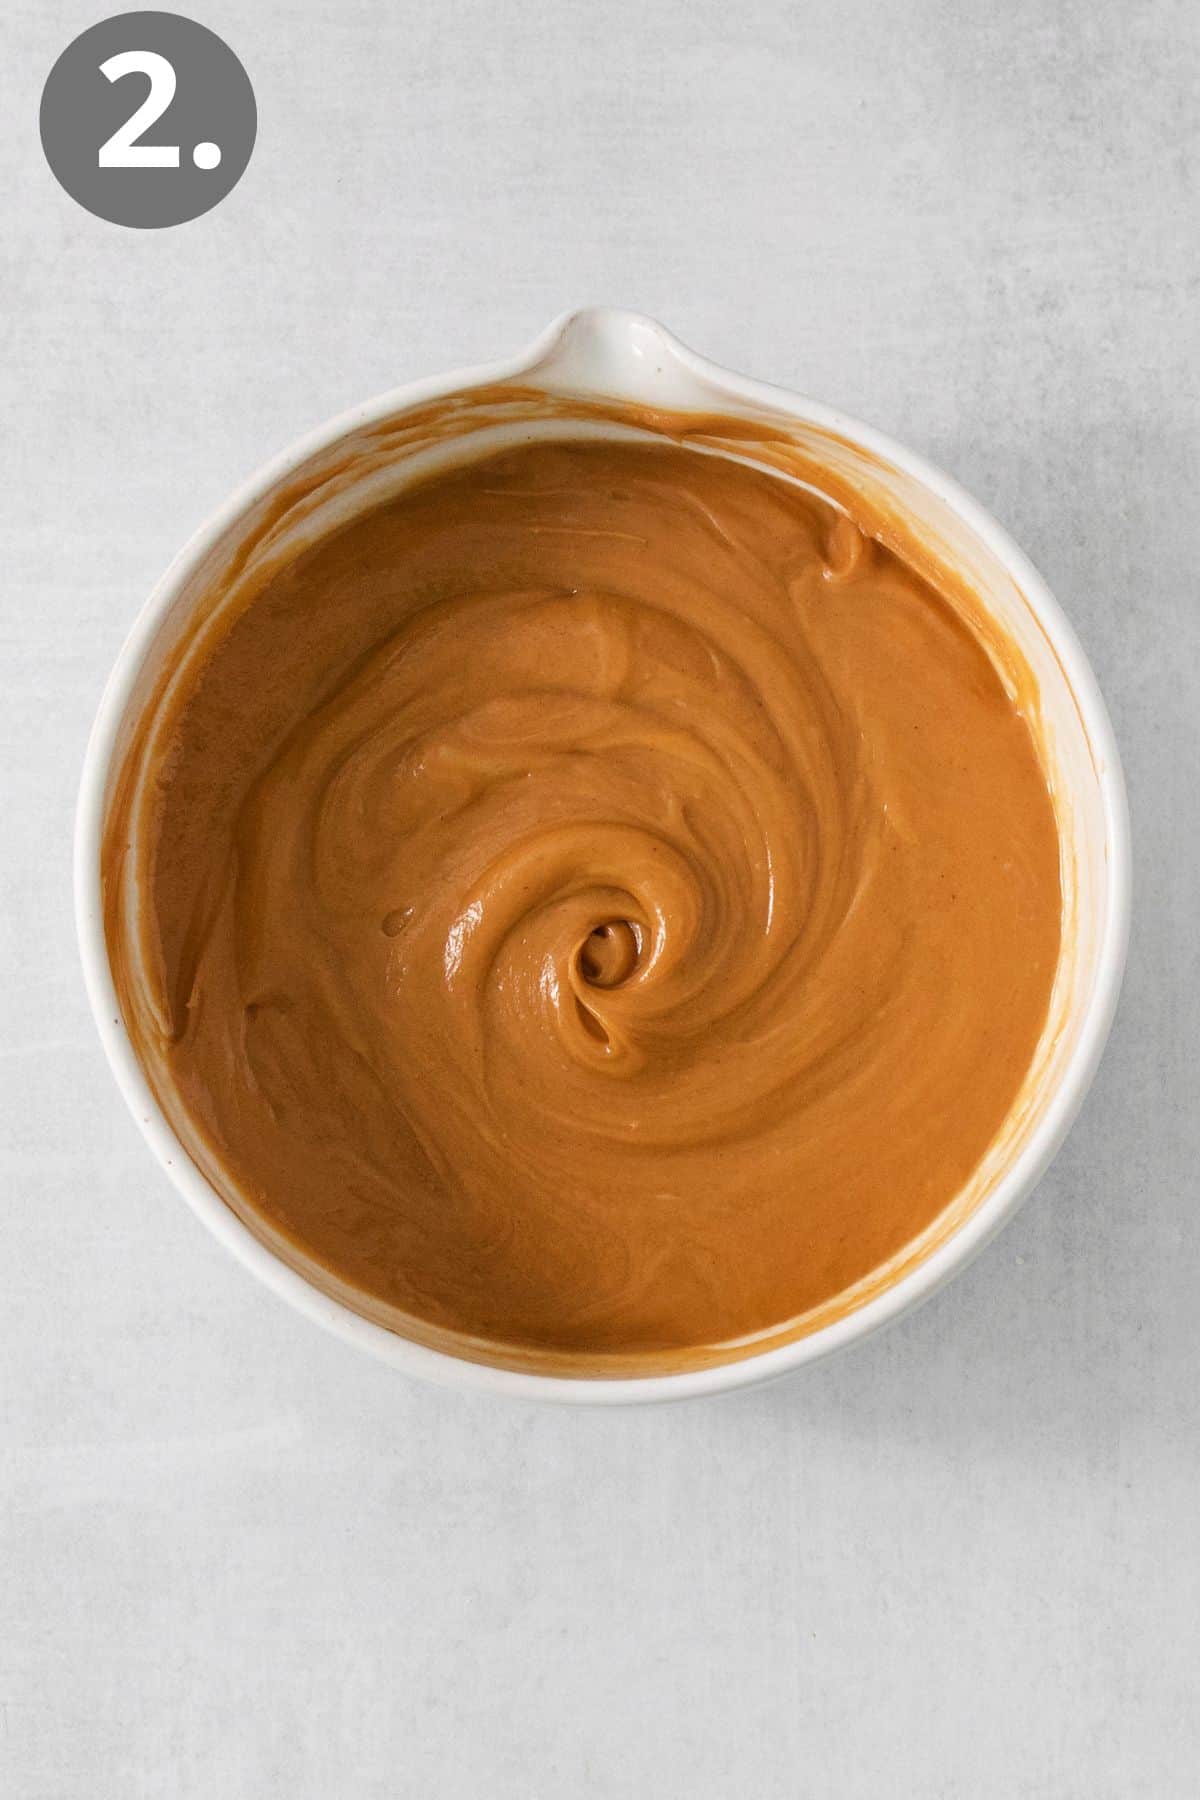 Peanut butter in a bowl